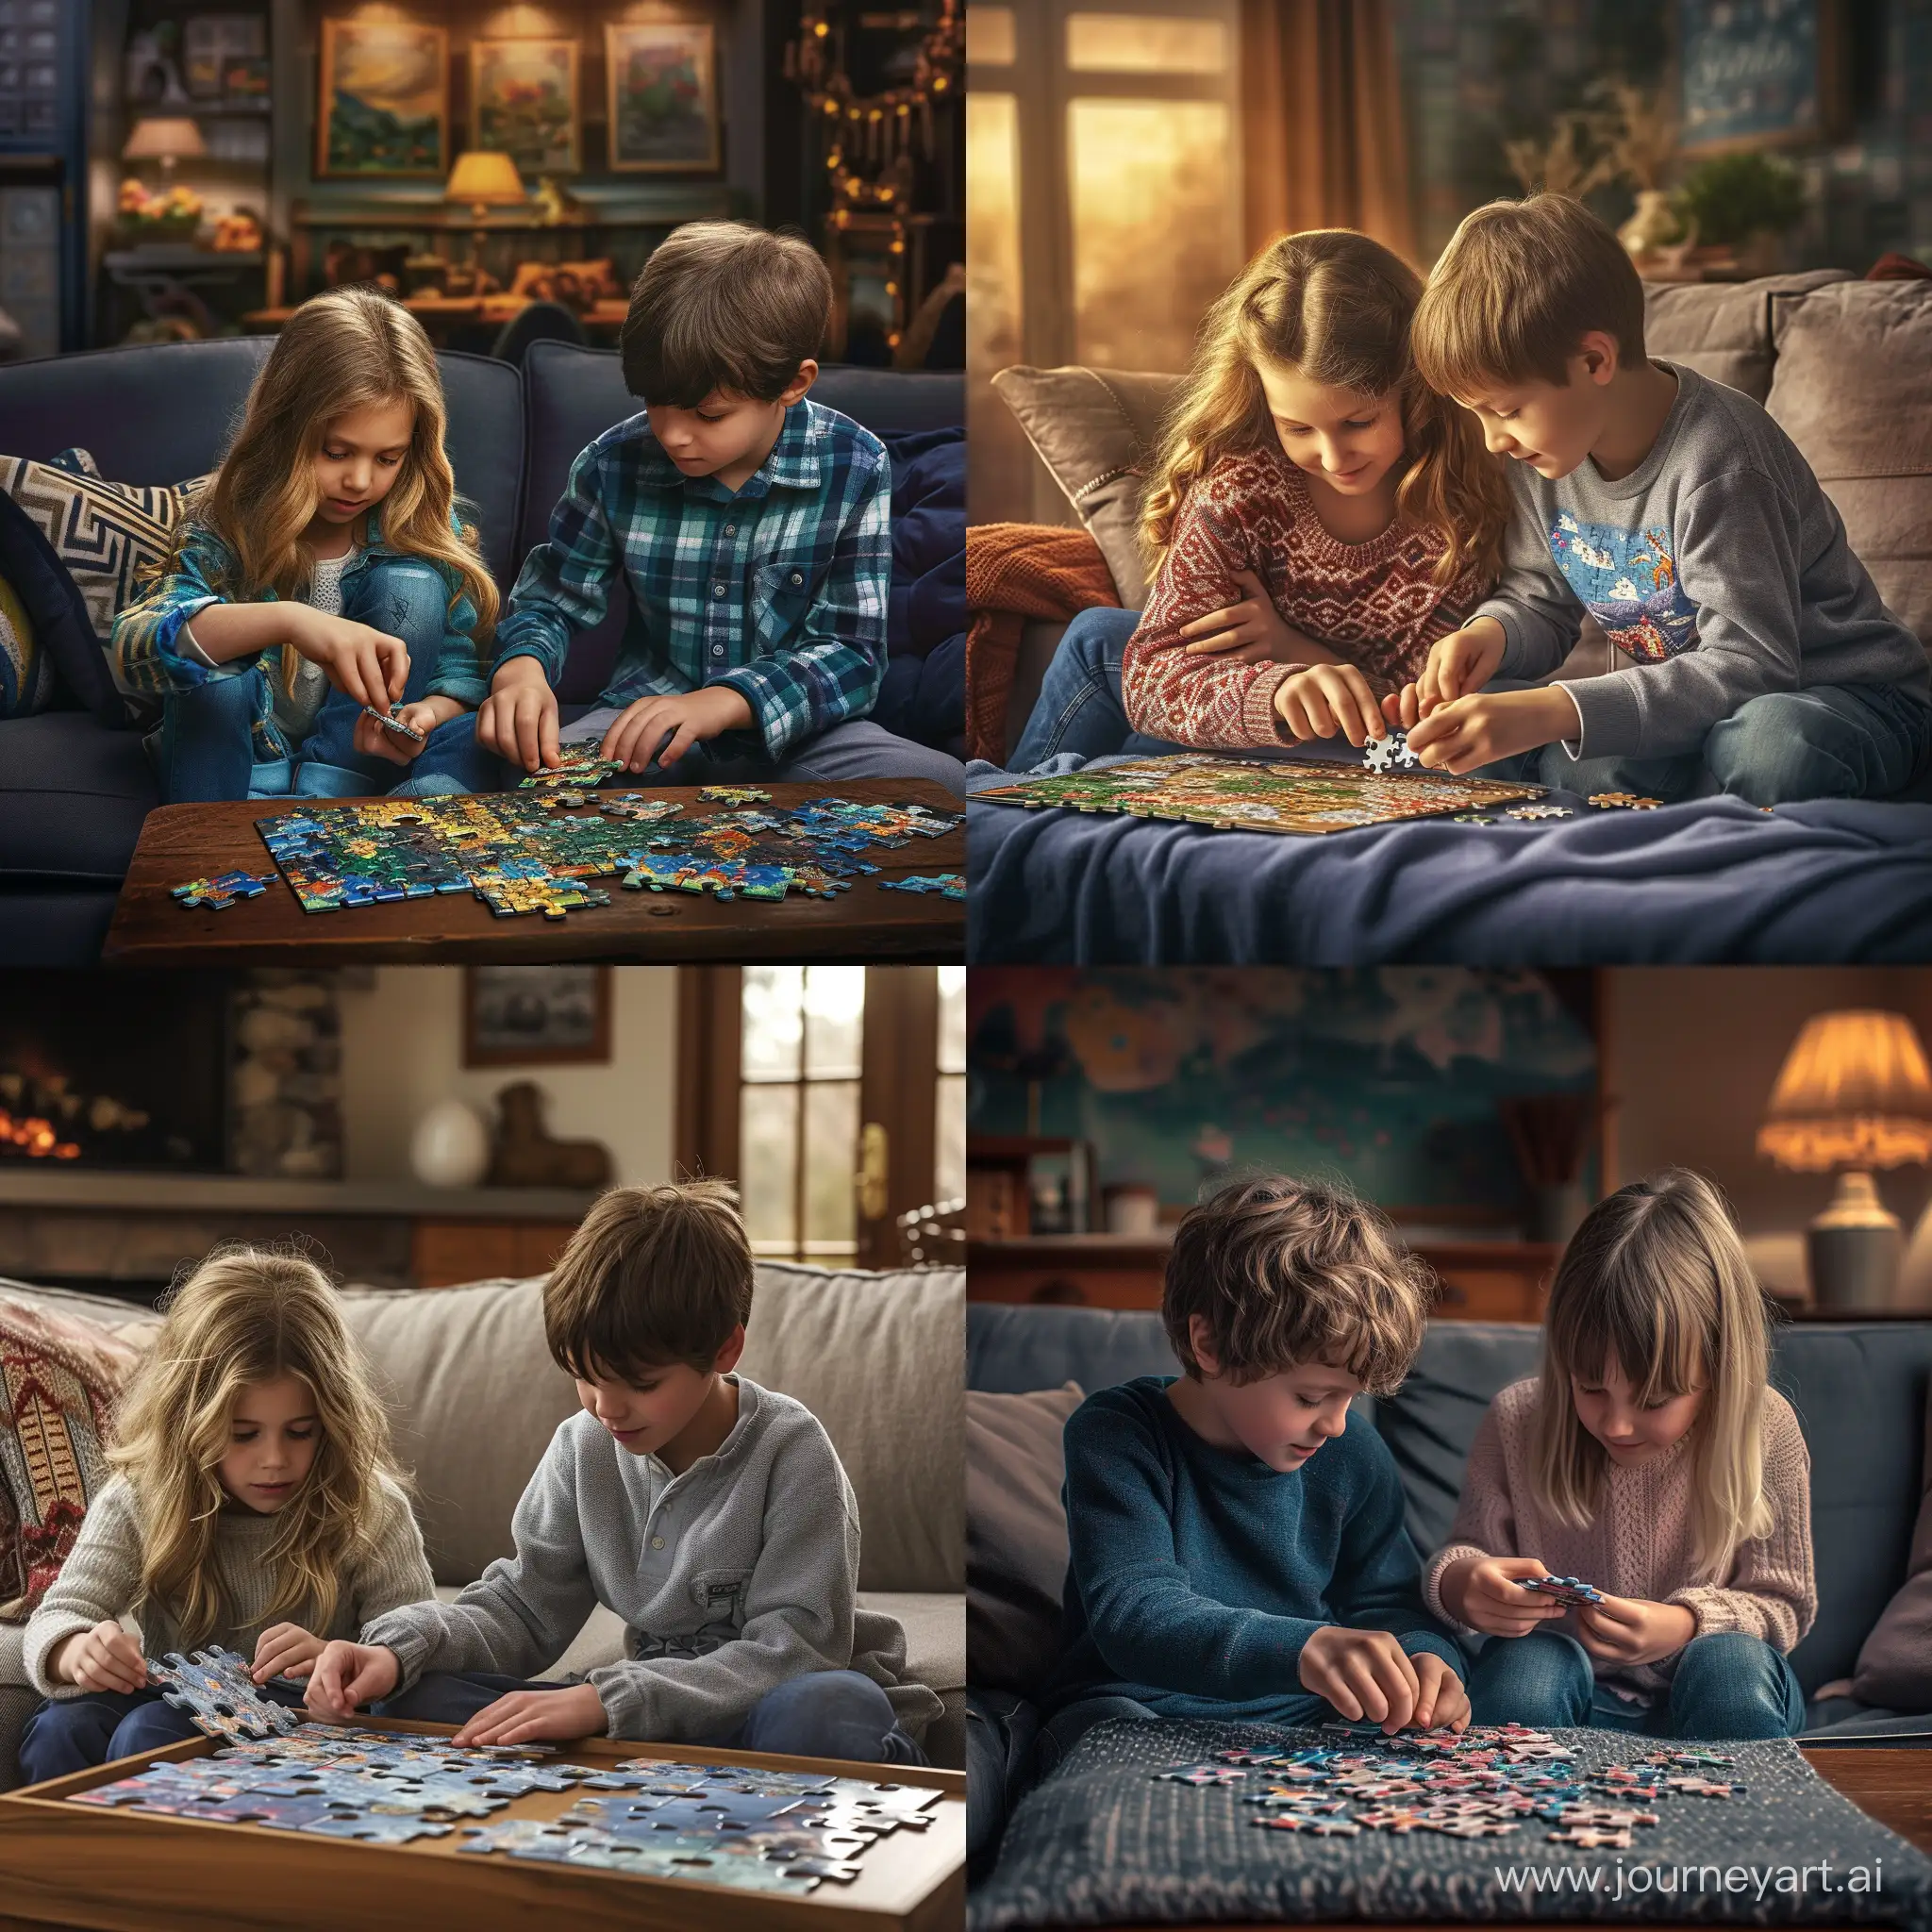 Enthusiastic-Children-Assembling-Puzzles-in-a-Cozy-Room